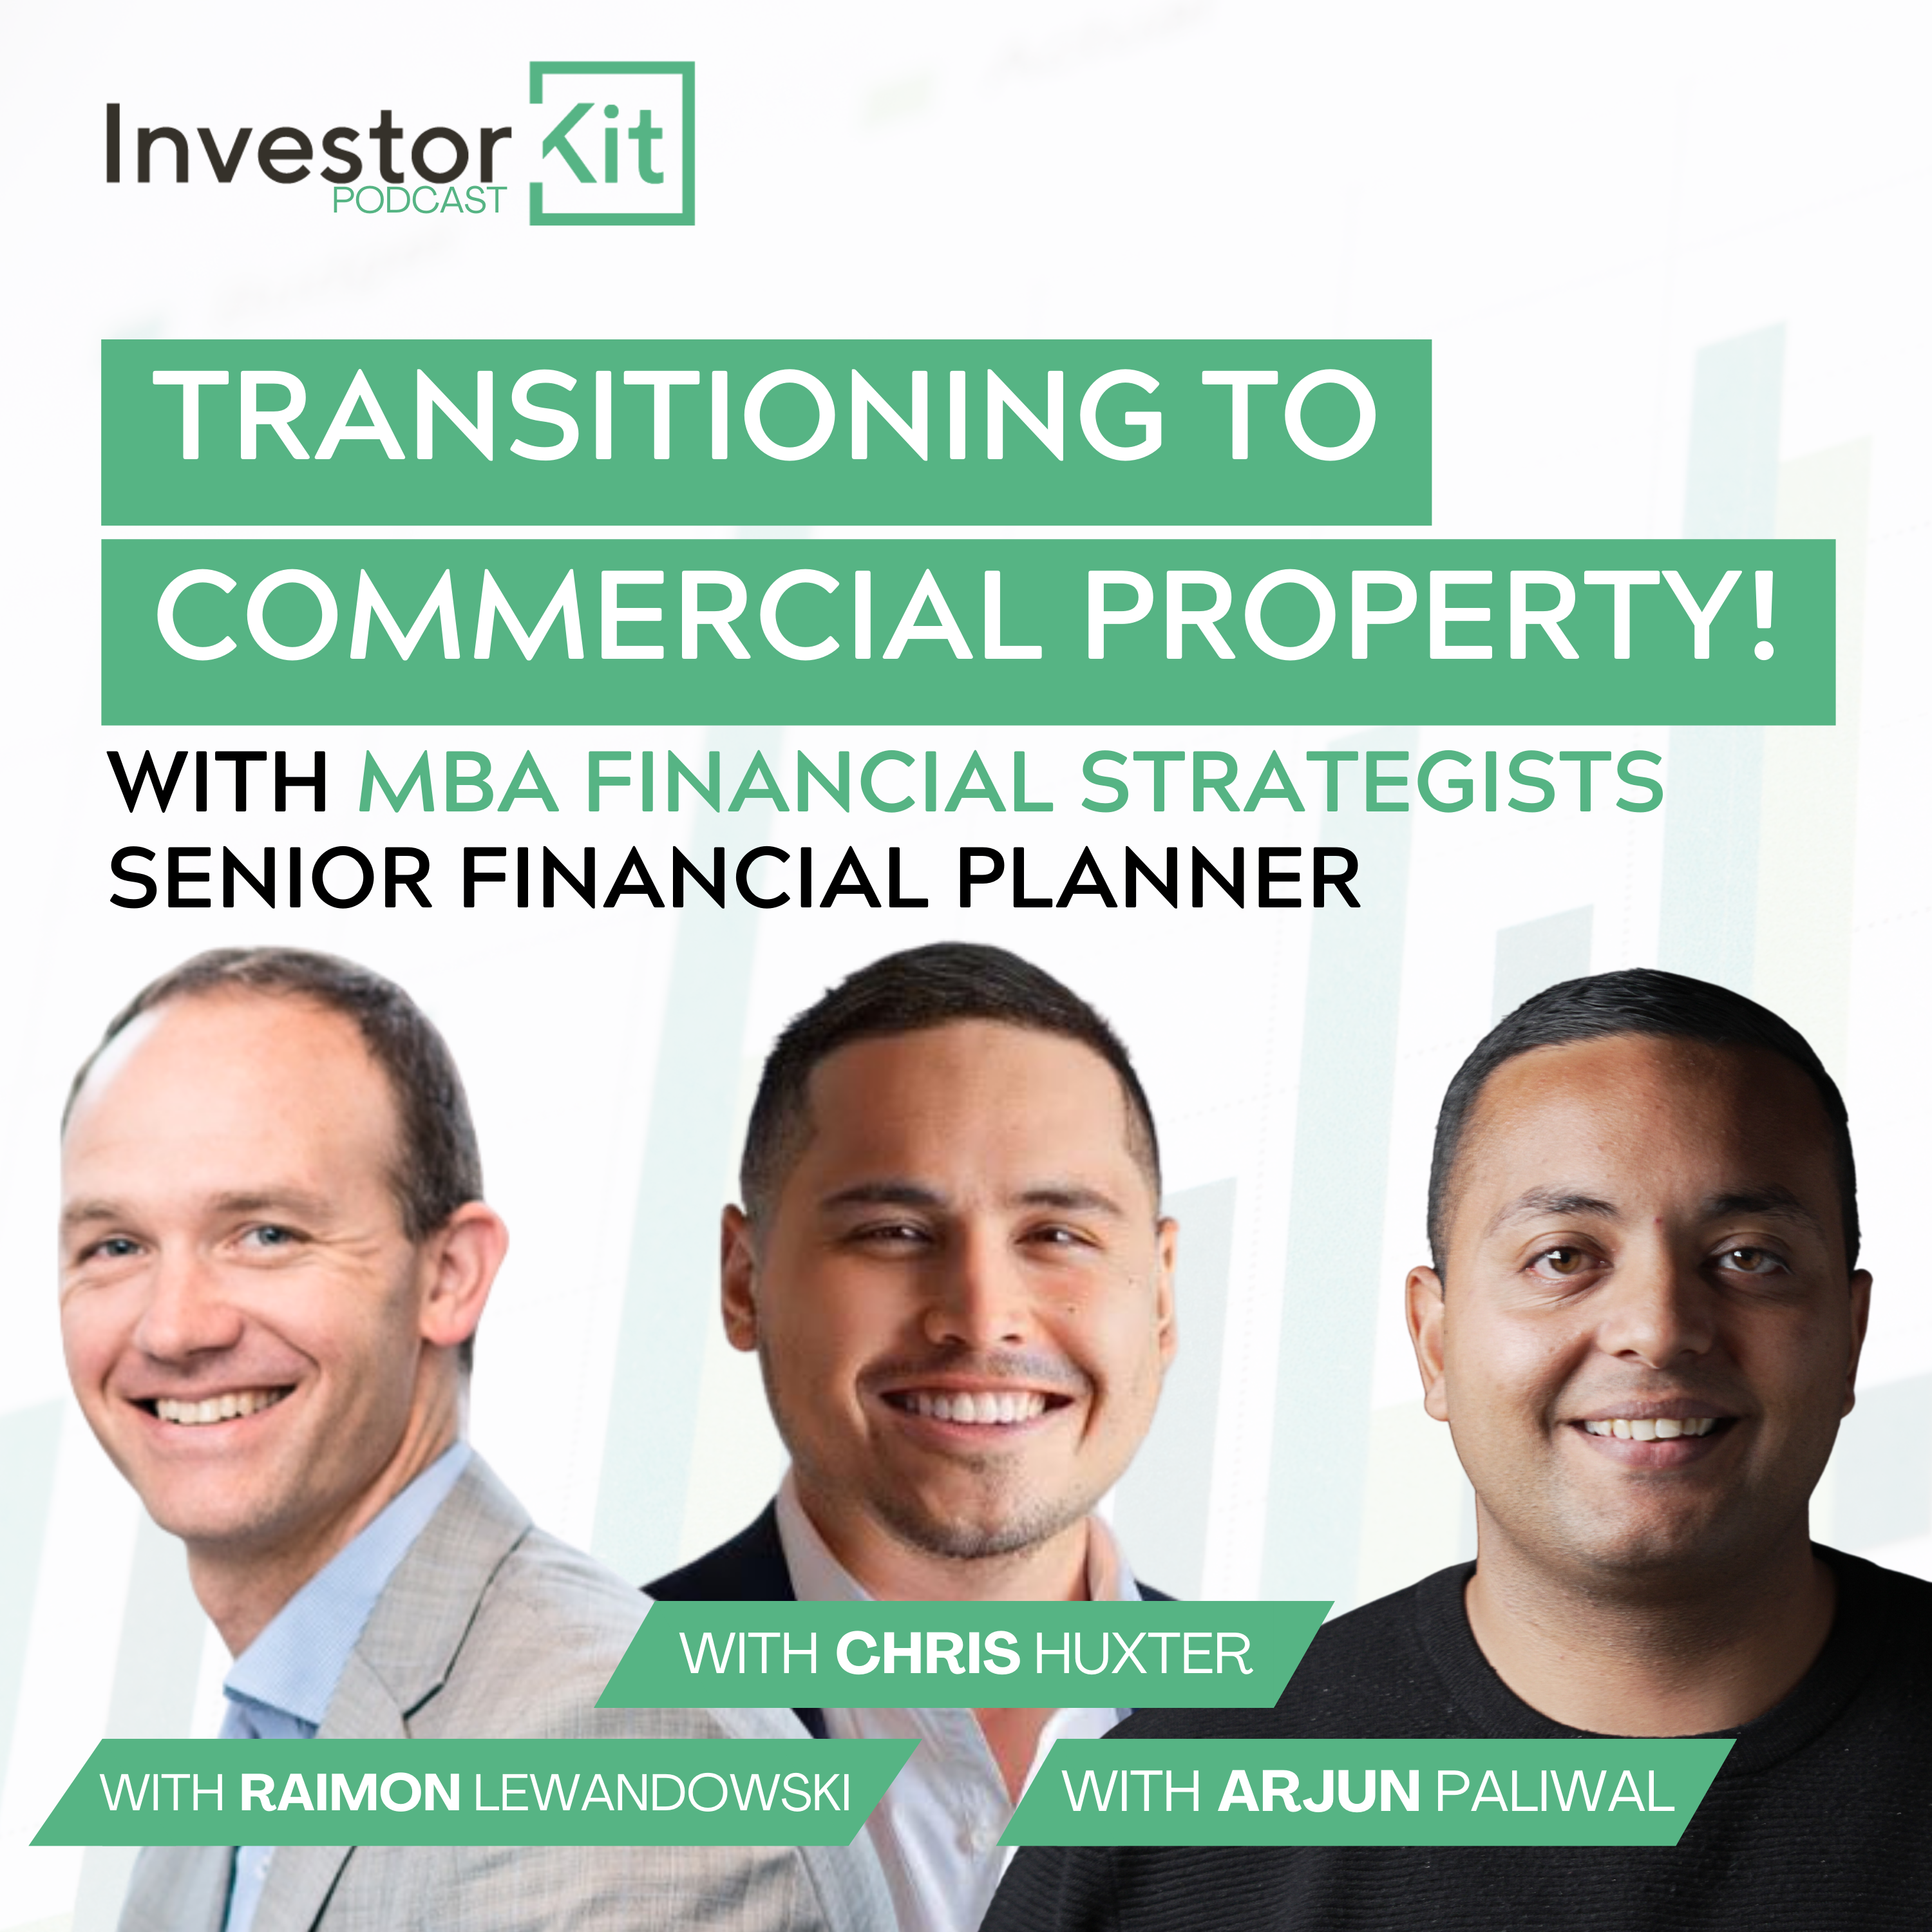 Transitioning from Residential to Commercial! - With Chris Huxter & Raimon Lewandowski